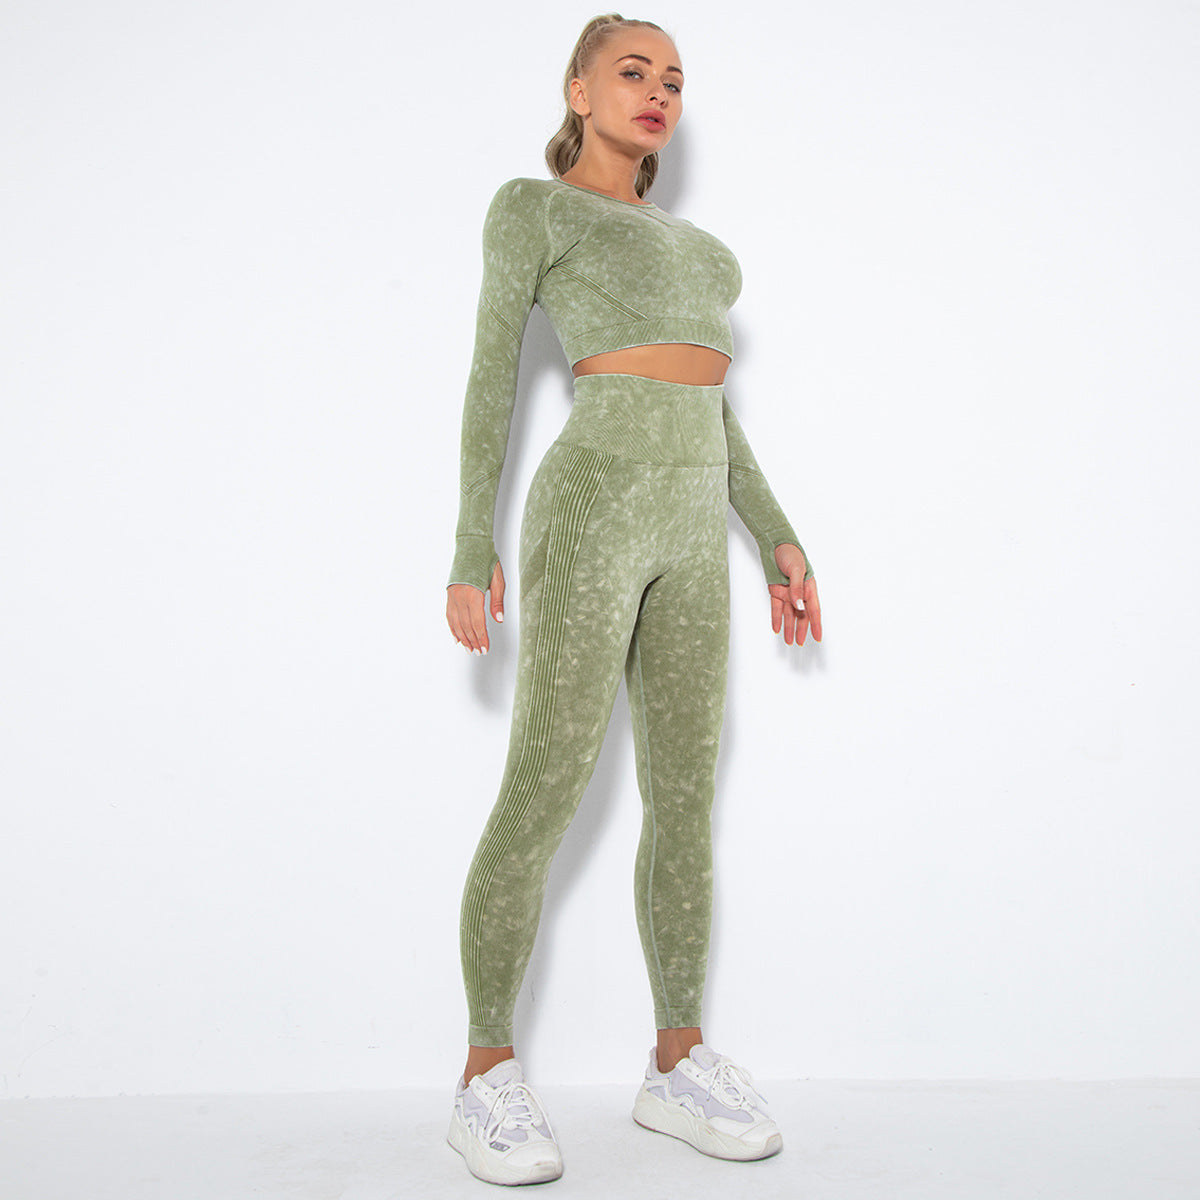 Sexy Simple Style Running Sports Suits